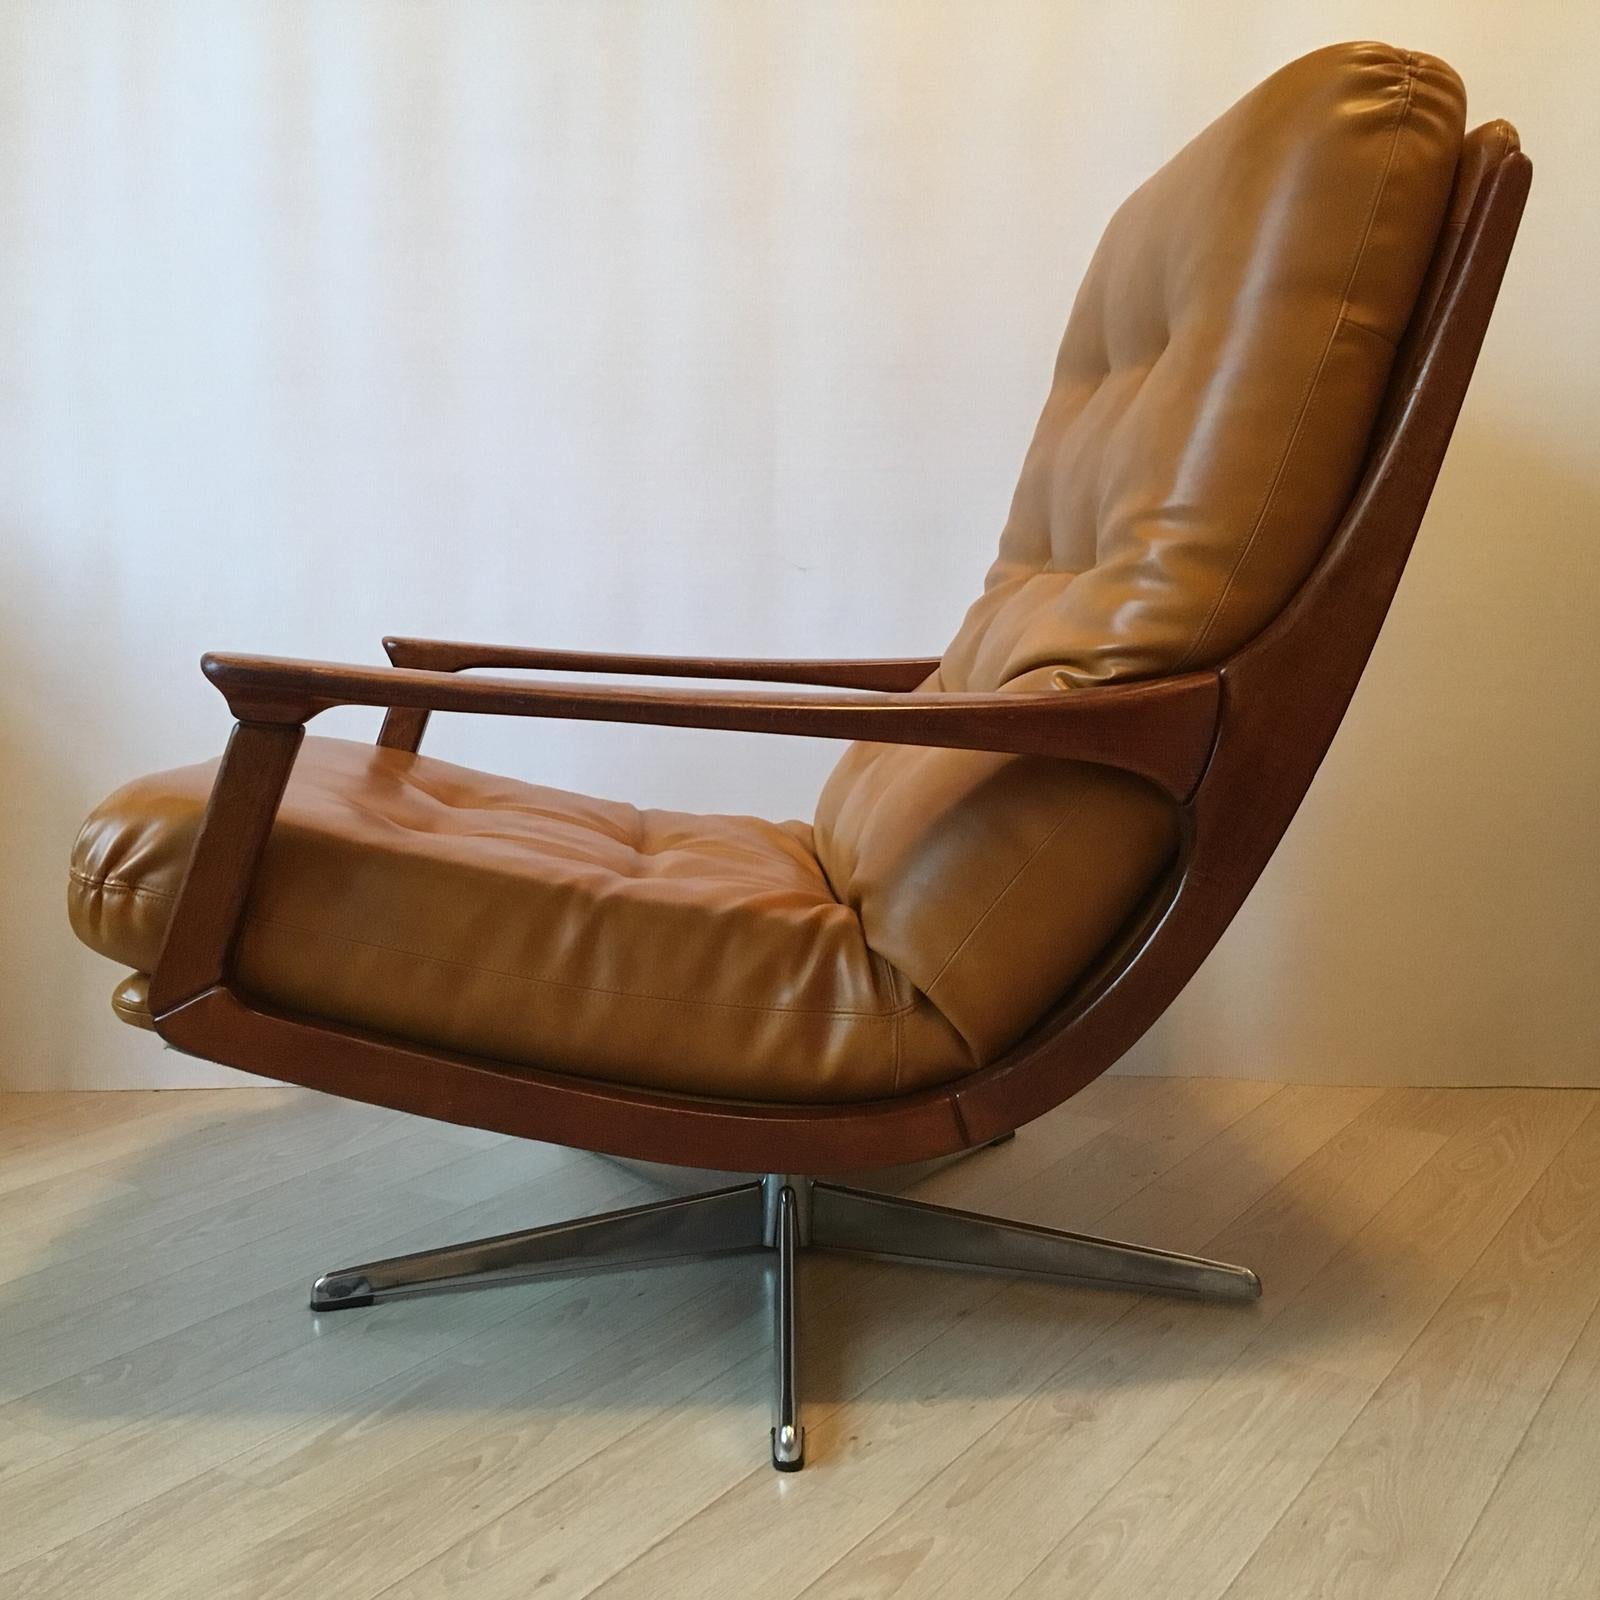 This vintage low armchair is very comfortable to seat, it is made of light brown leather and features wooden arms. It looks luxurious due to its color and soft lines of the wooden parts. I like combination of leather with warmth of the wood.
I